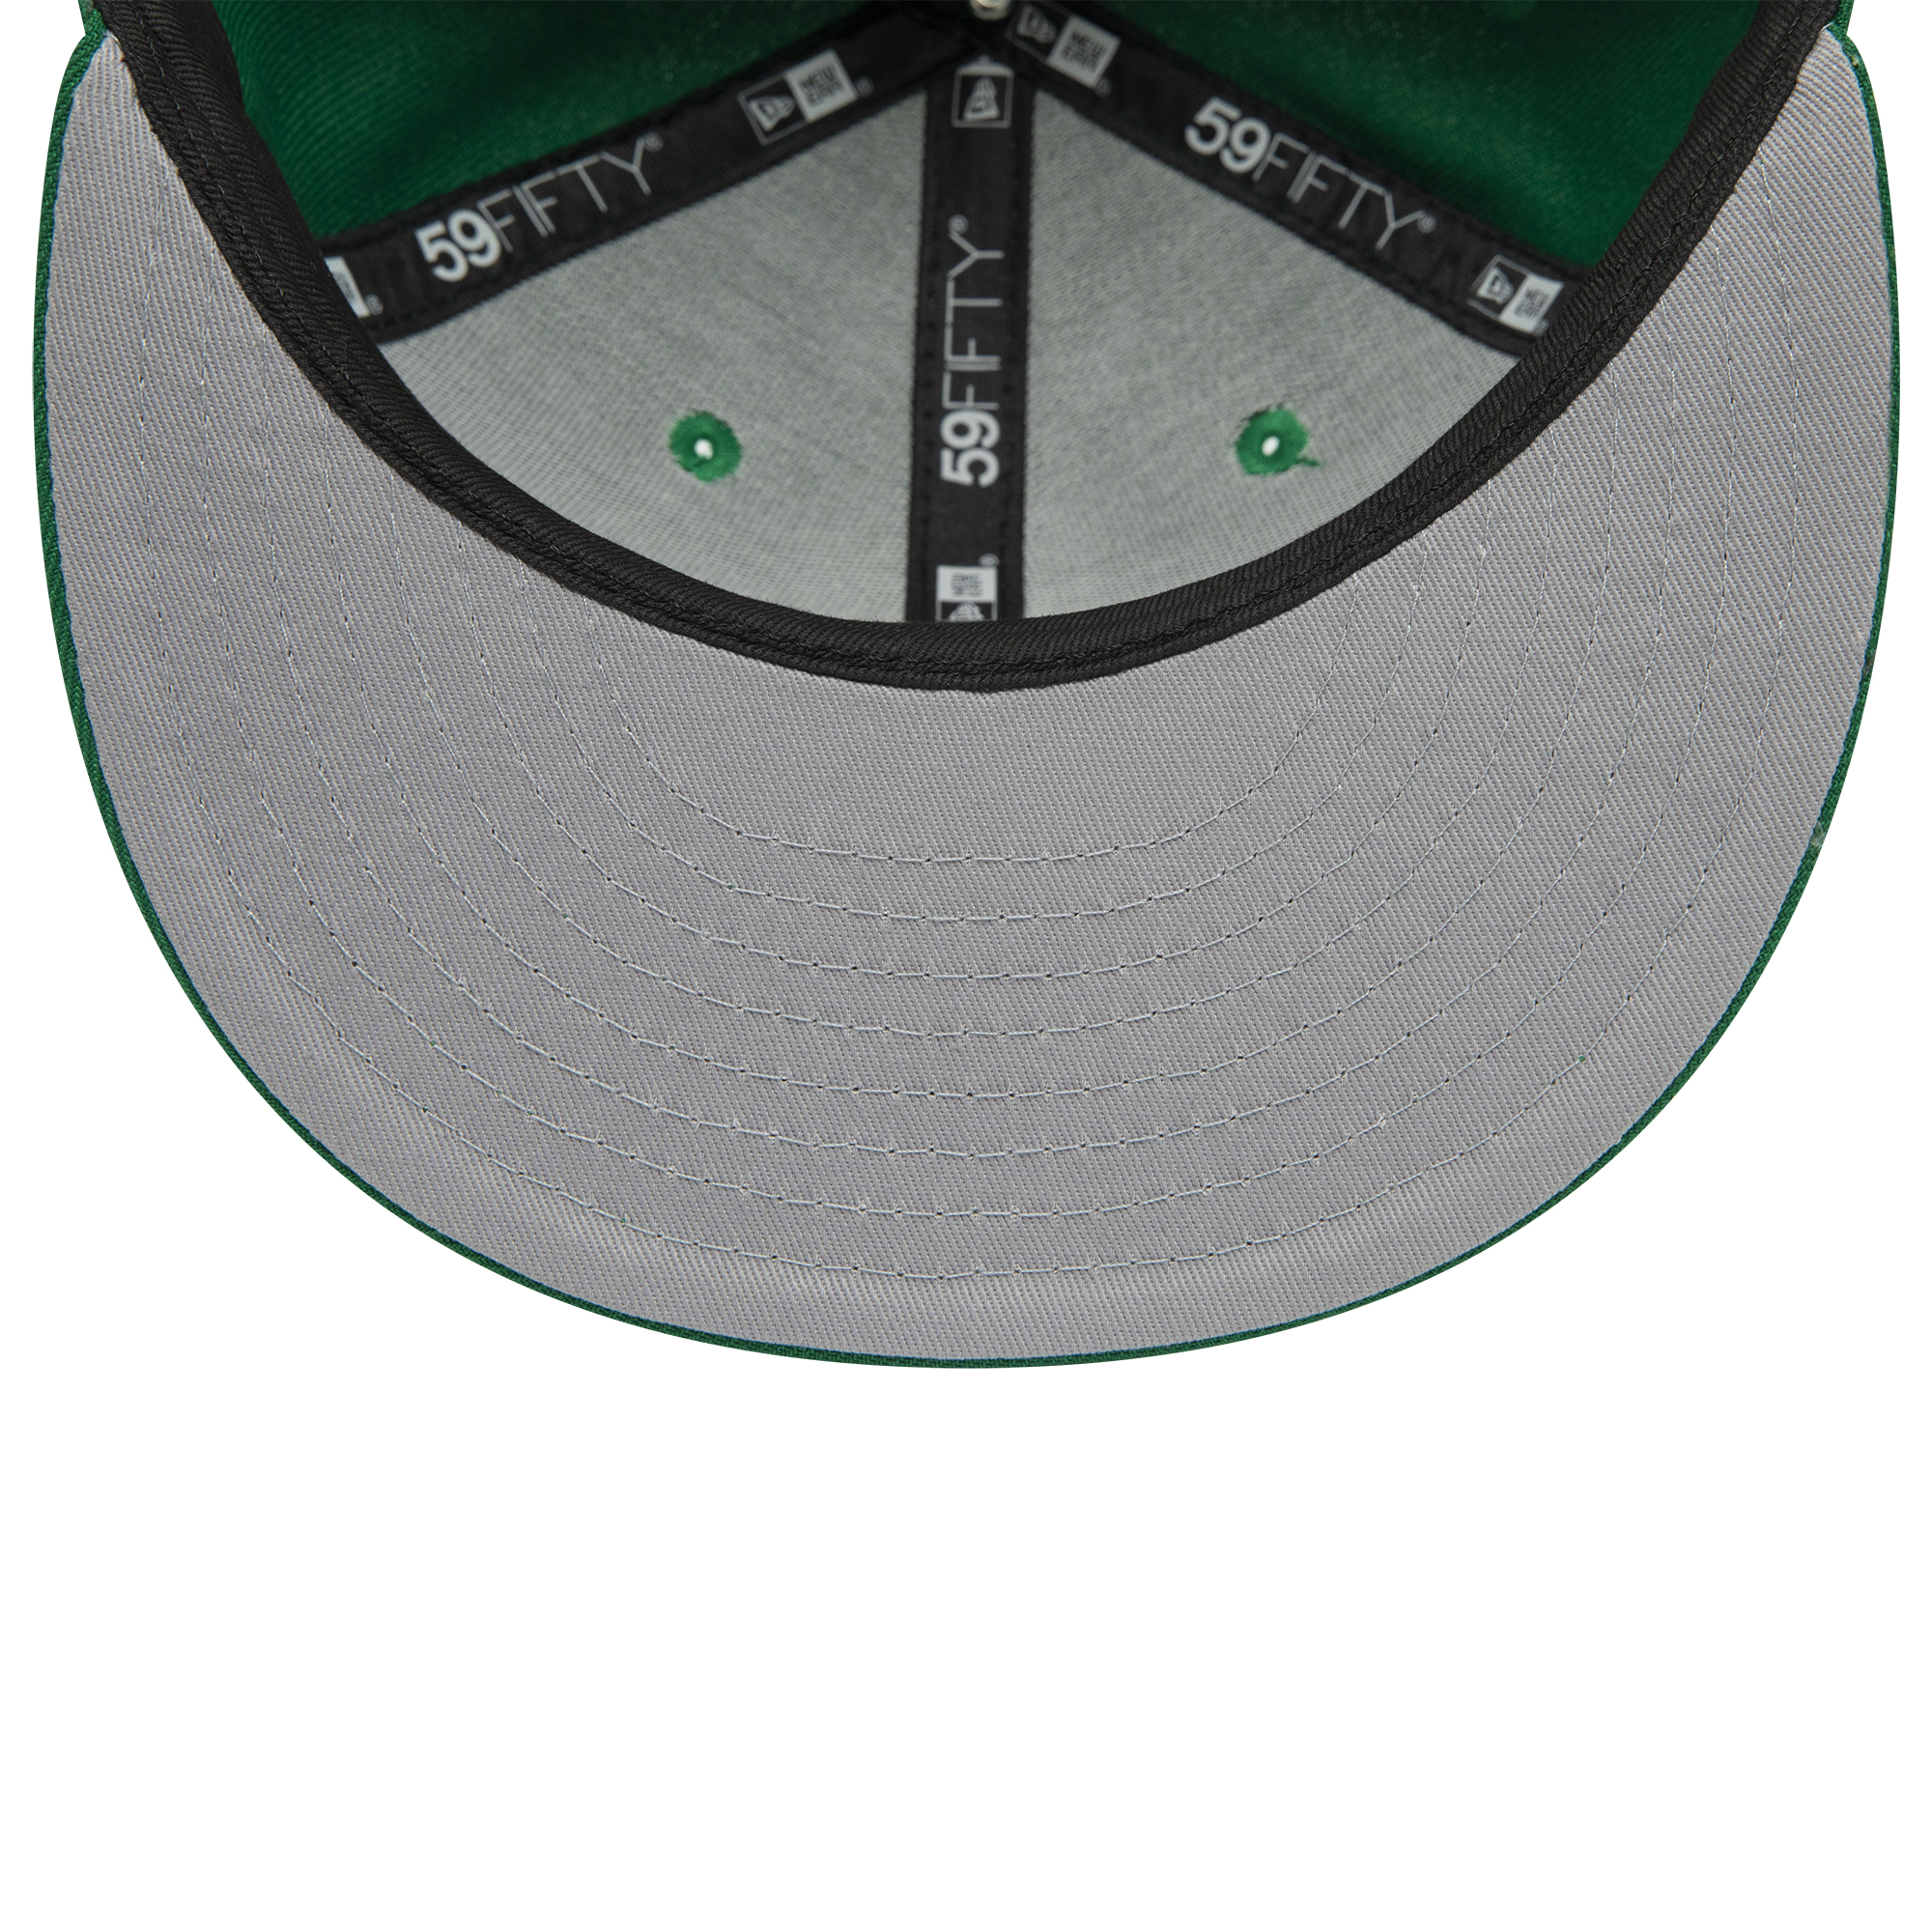 Chicago White Sox Kelly Green 59FIFTY Fitted Cap